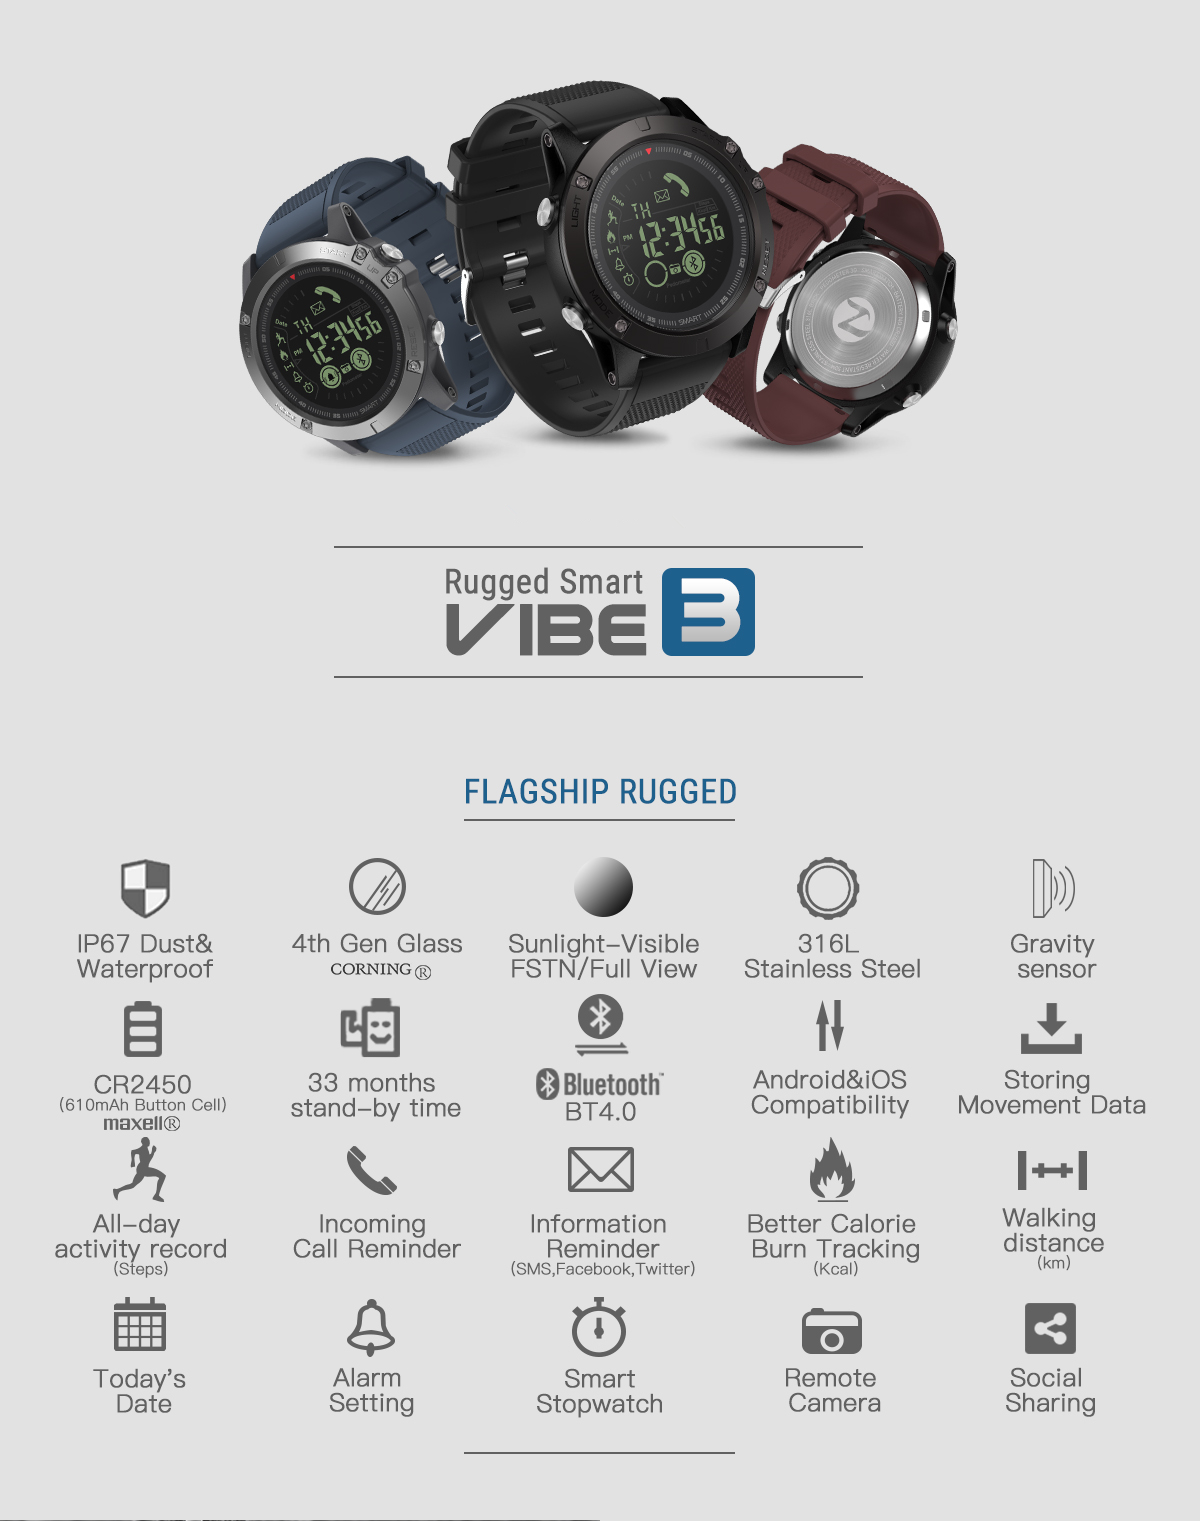 Zeblaze VIBE 3 Flagship Rugged All-day Activity Record Sport 33 Month Long Standby Smart Watch 21